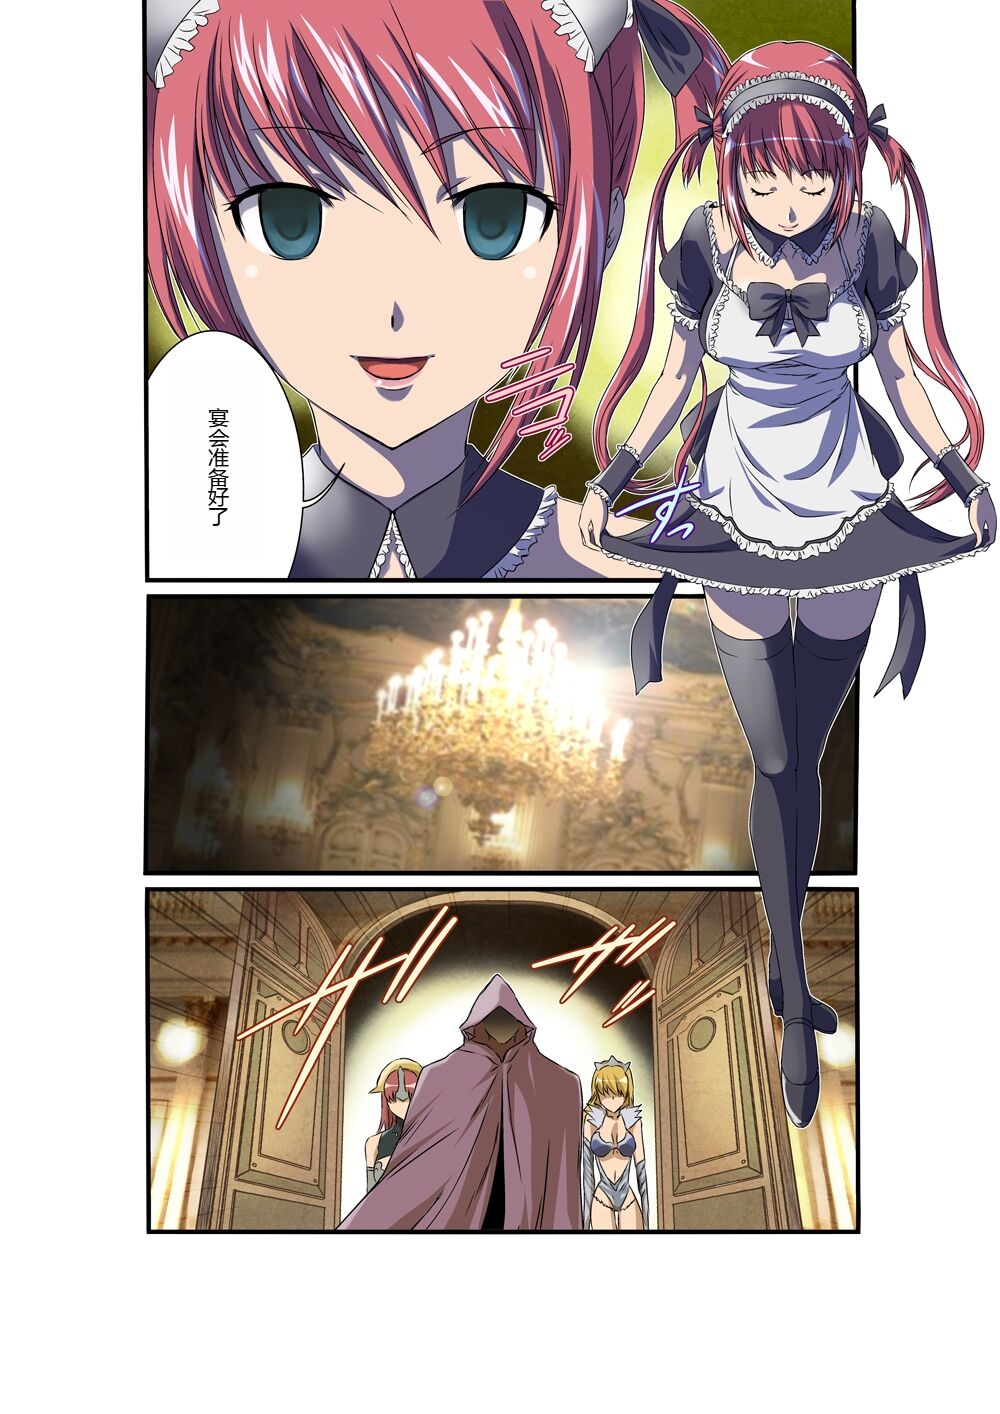 [Utsuro na Hitomi] Queen's *lade Mind-control Manga (Queen's Blade) [chinese] [lalala1234个人机翻汉化] 15